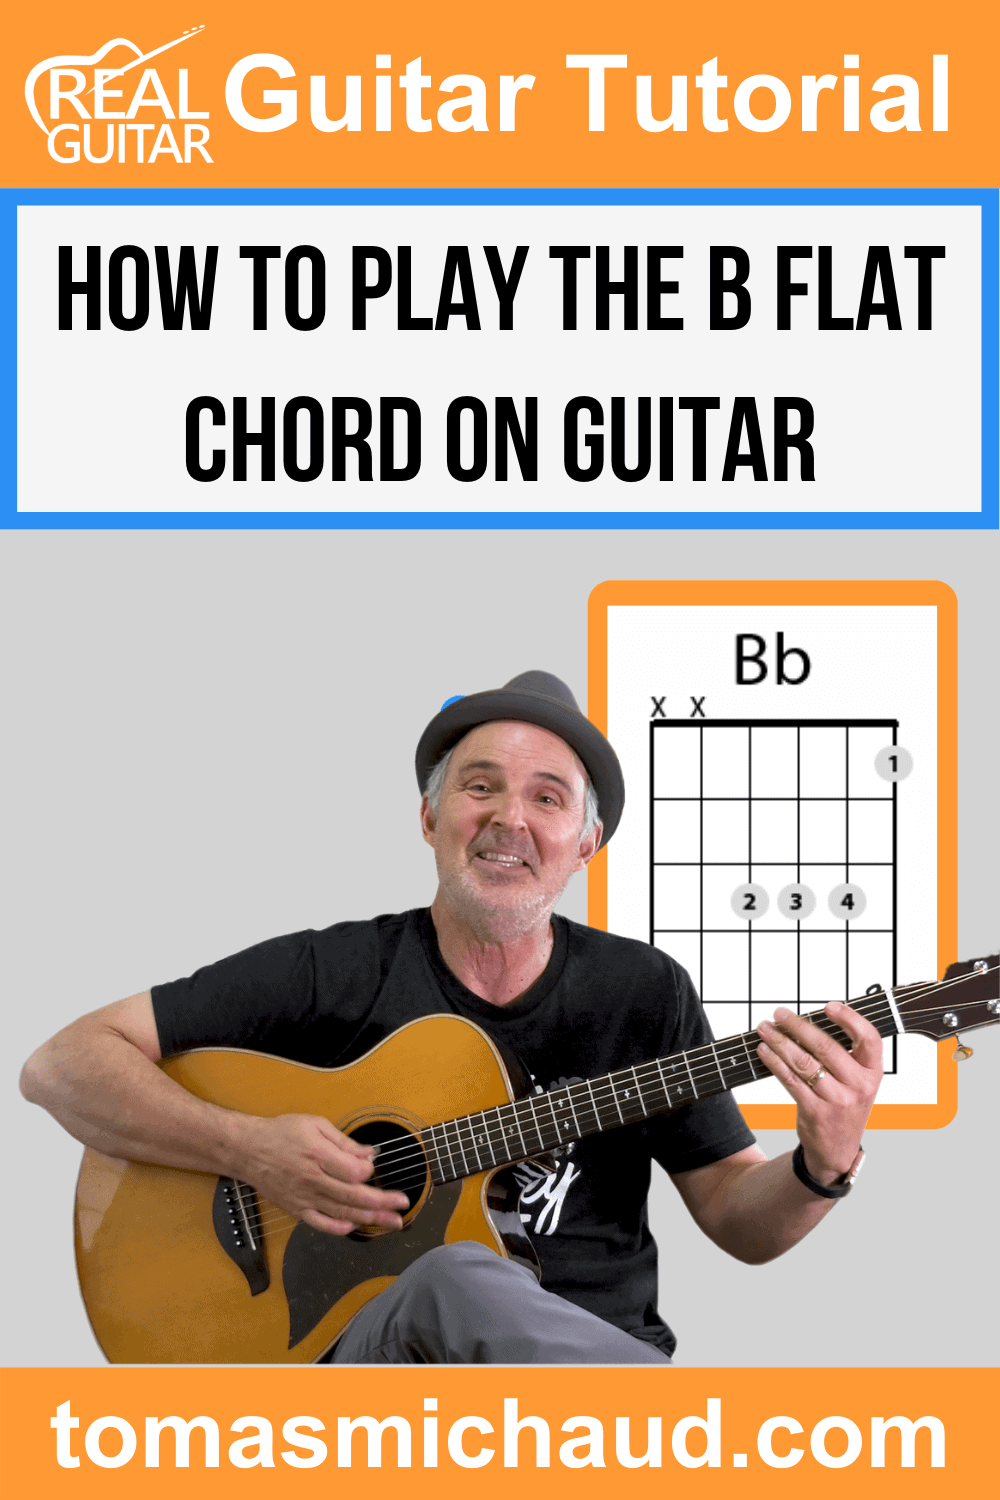 How To Play The B Flat Chord On Guitar